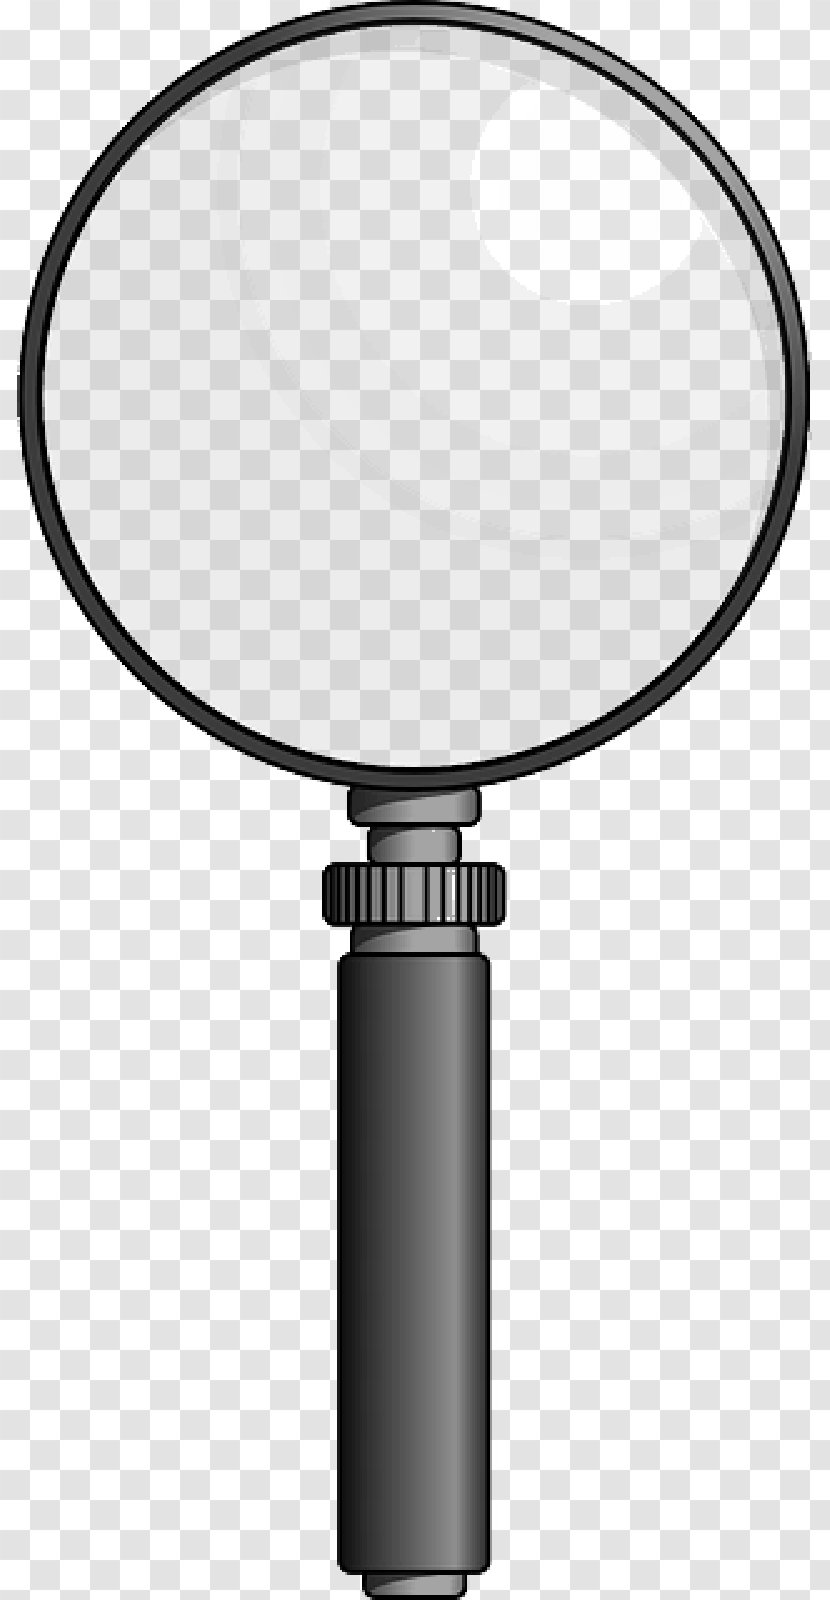 Magnifying Glass Clip Art - Magnifier - Loupe Image Transparent PNG